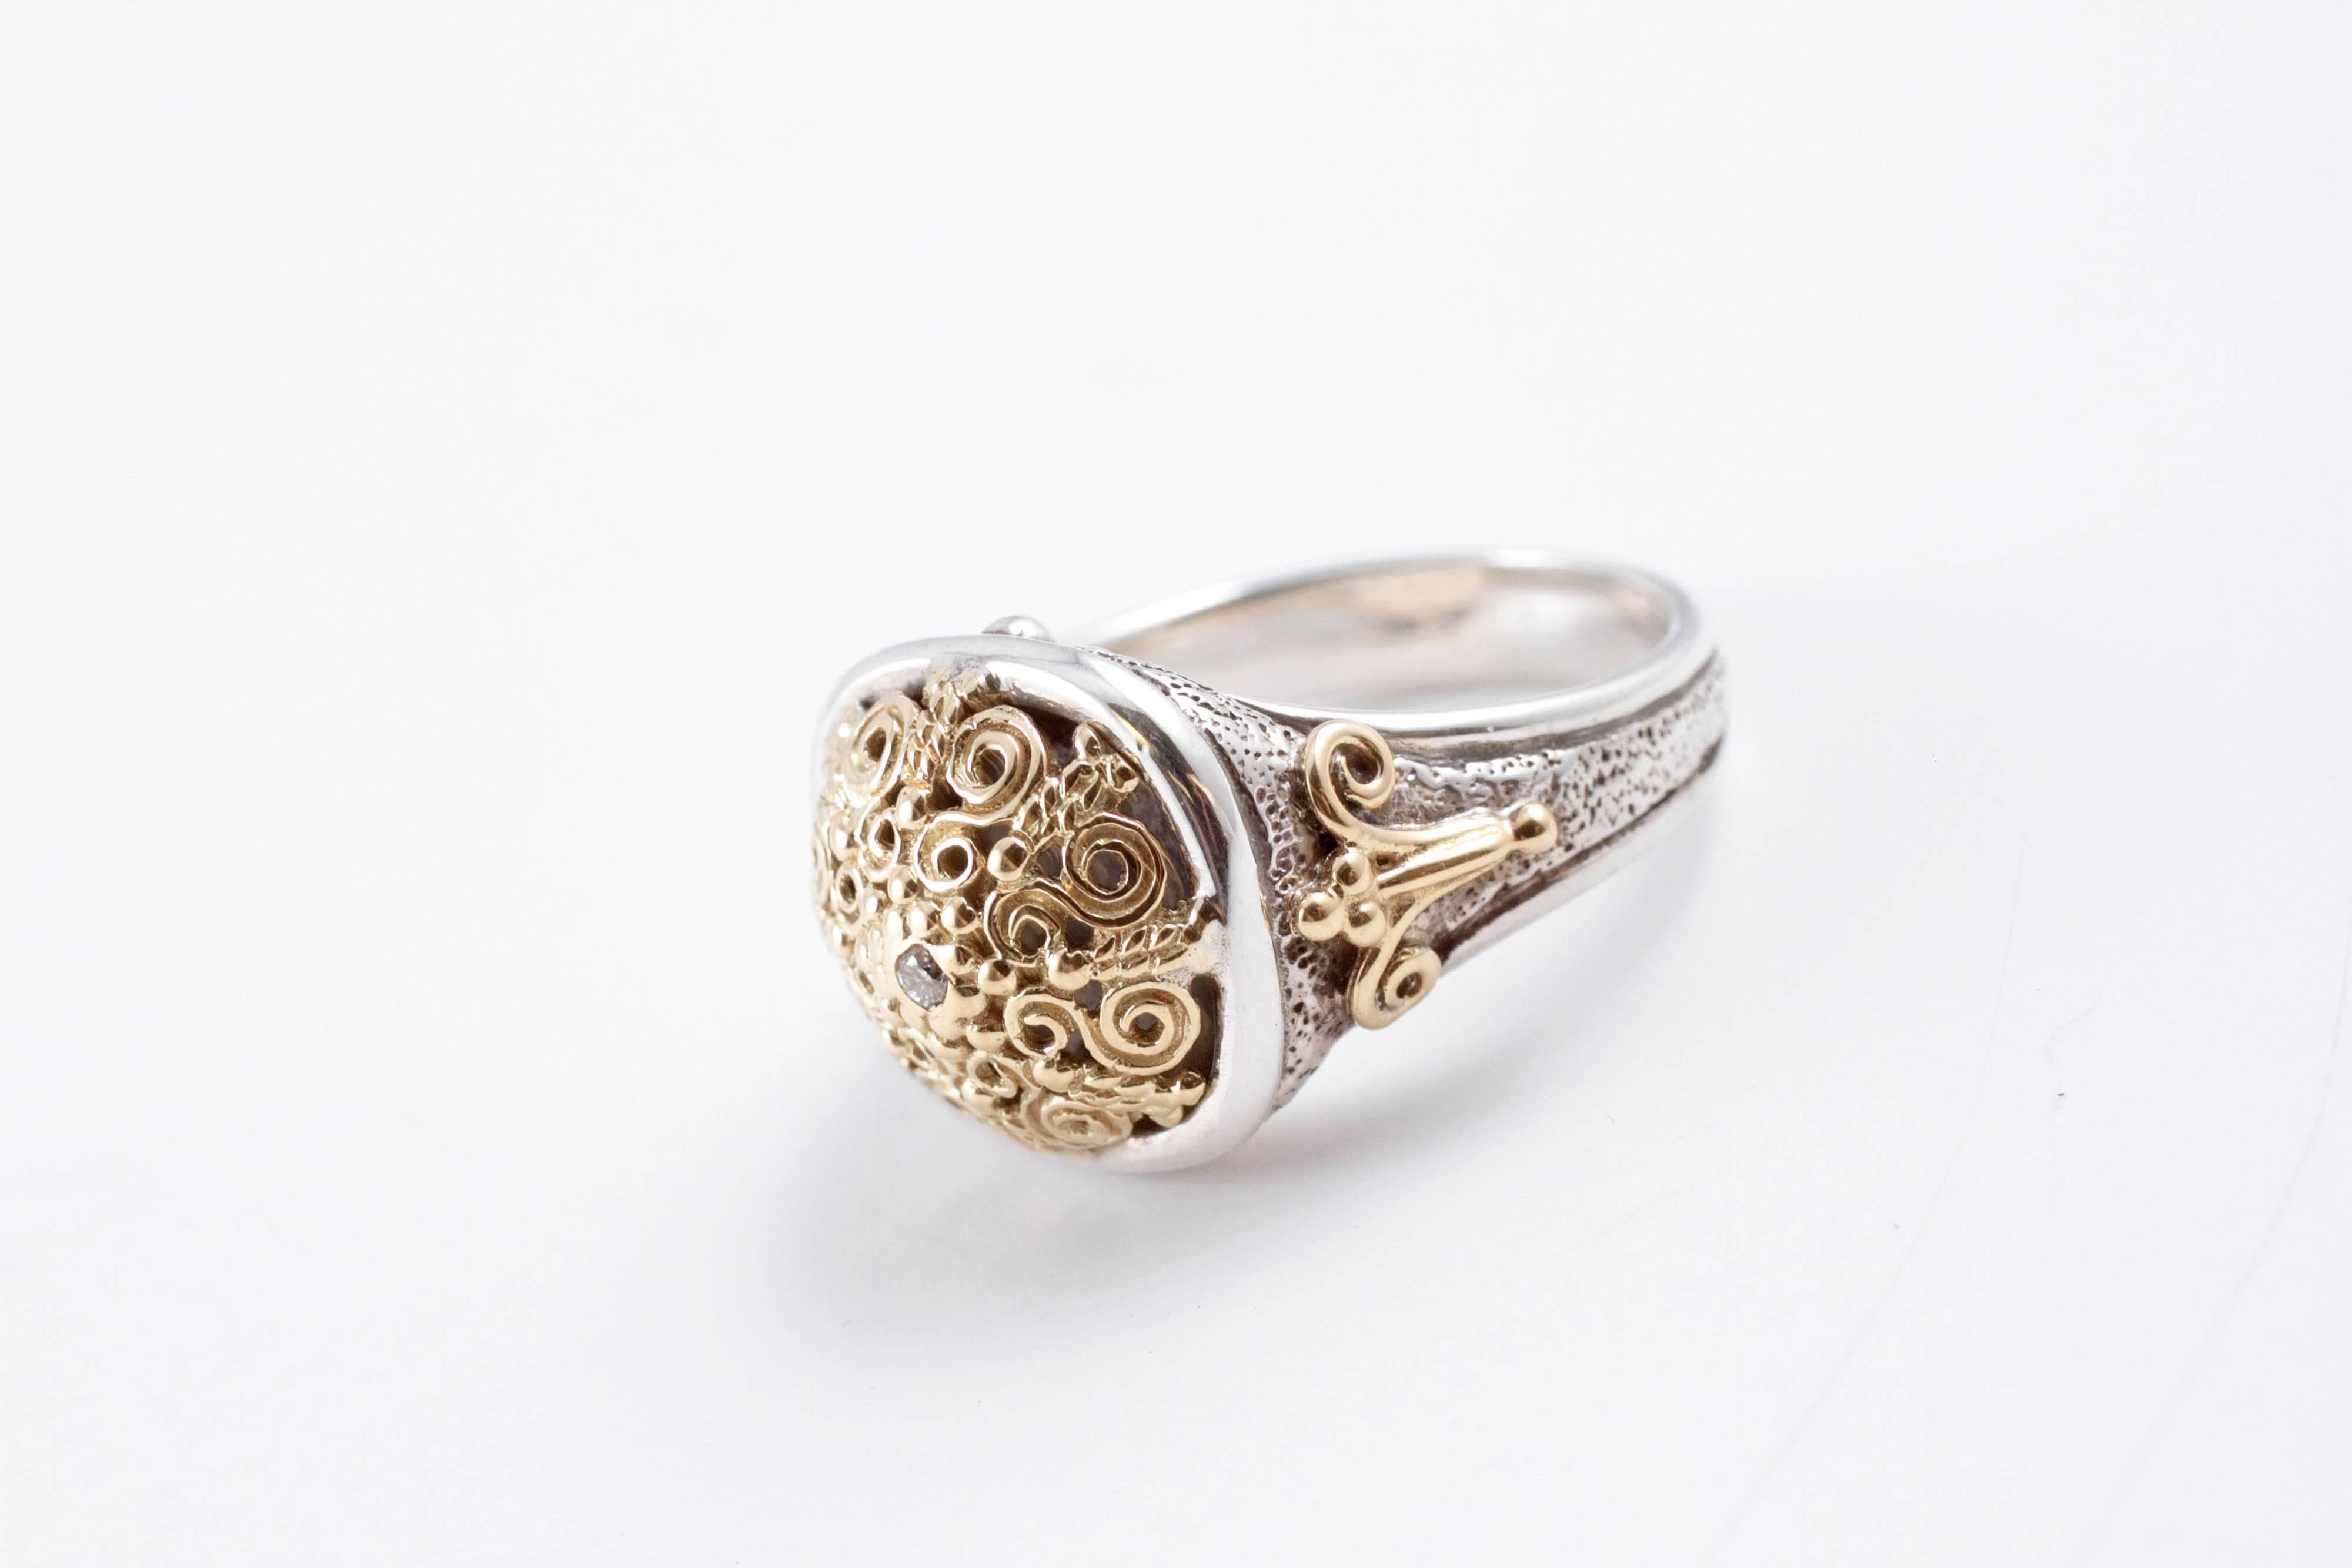 Beautifully detailed Konstantino ring in 18 karat yellow gold and sterling silver with diamond accent.  Great to wear everyday or for special occasions!